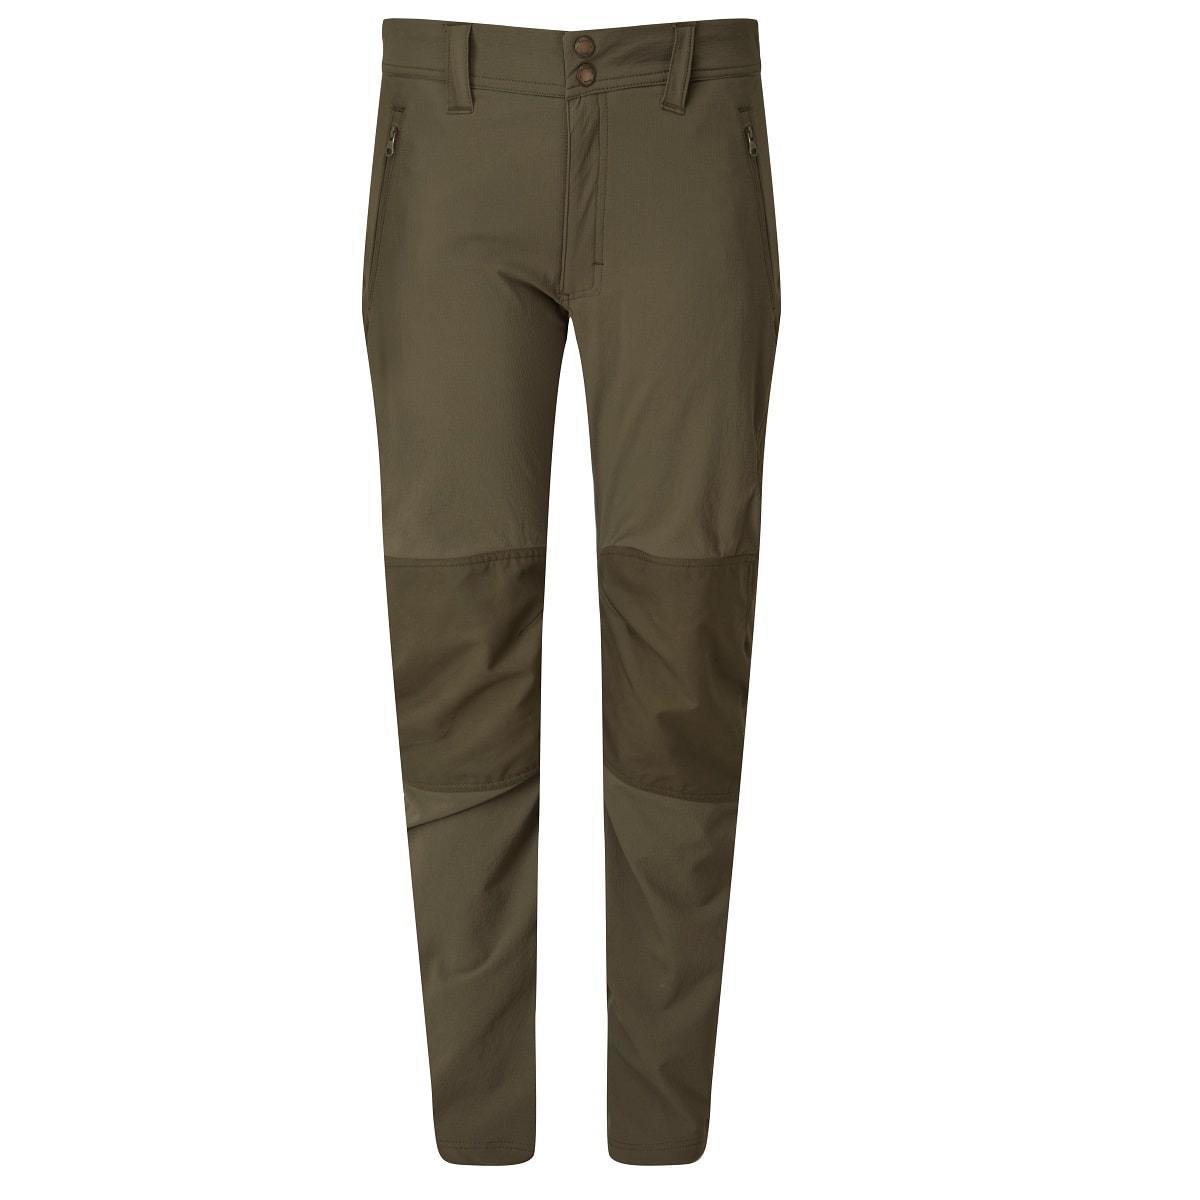 Keela, Keela Ladies' Heritage Scuffer Trousers, Trousers & Shorts, Wylies Outdoor World,